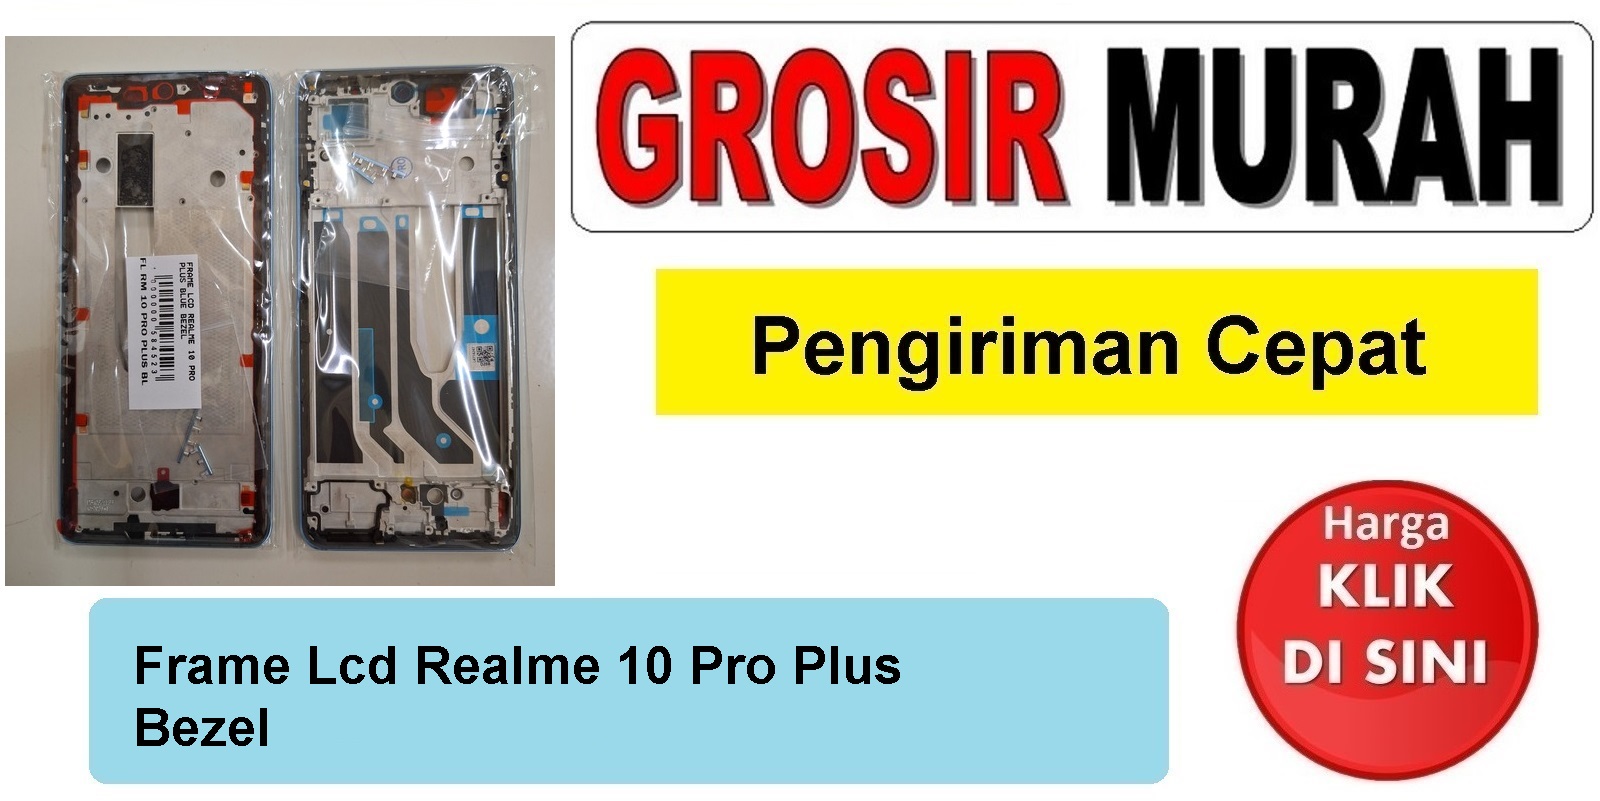 Frame Lcd Realme 10 Pro Plus Bezel Middle Frame Front Dudukan Tulang Tengah Bazel lcd Bezel Plate Spare Part Hp Grosir